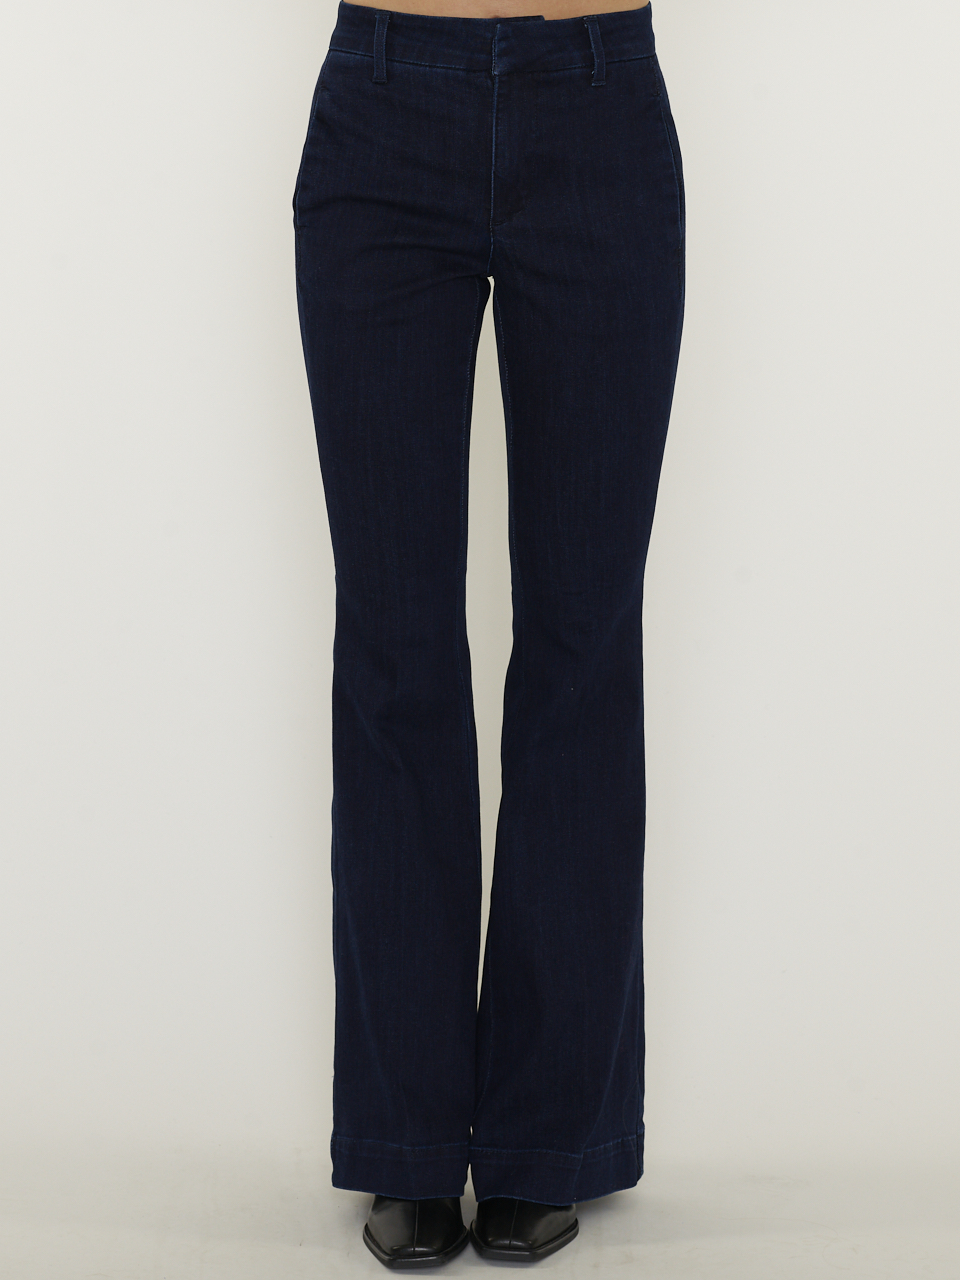 JEANS AYOMW 158 HIGH BOOTCUT Y